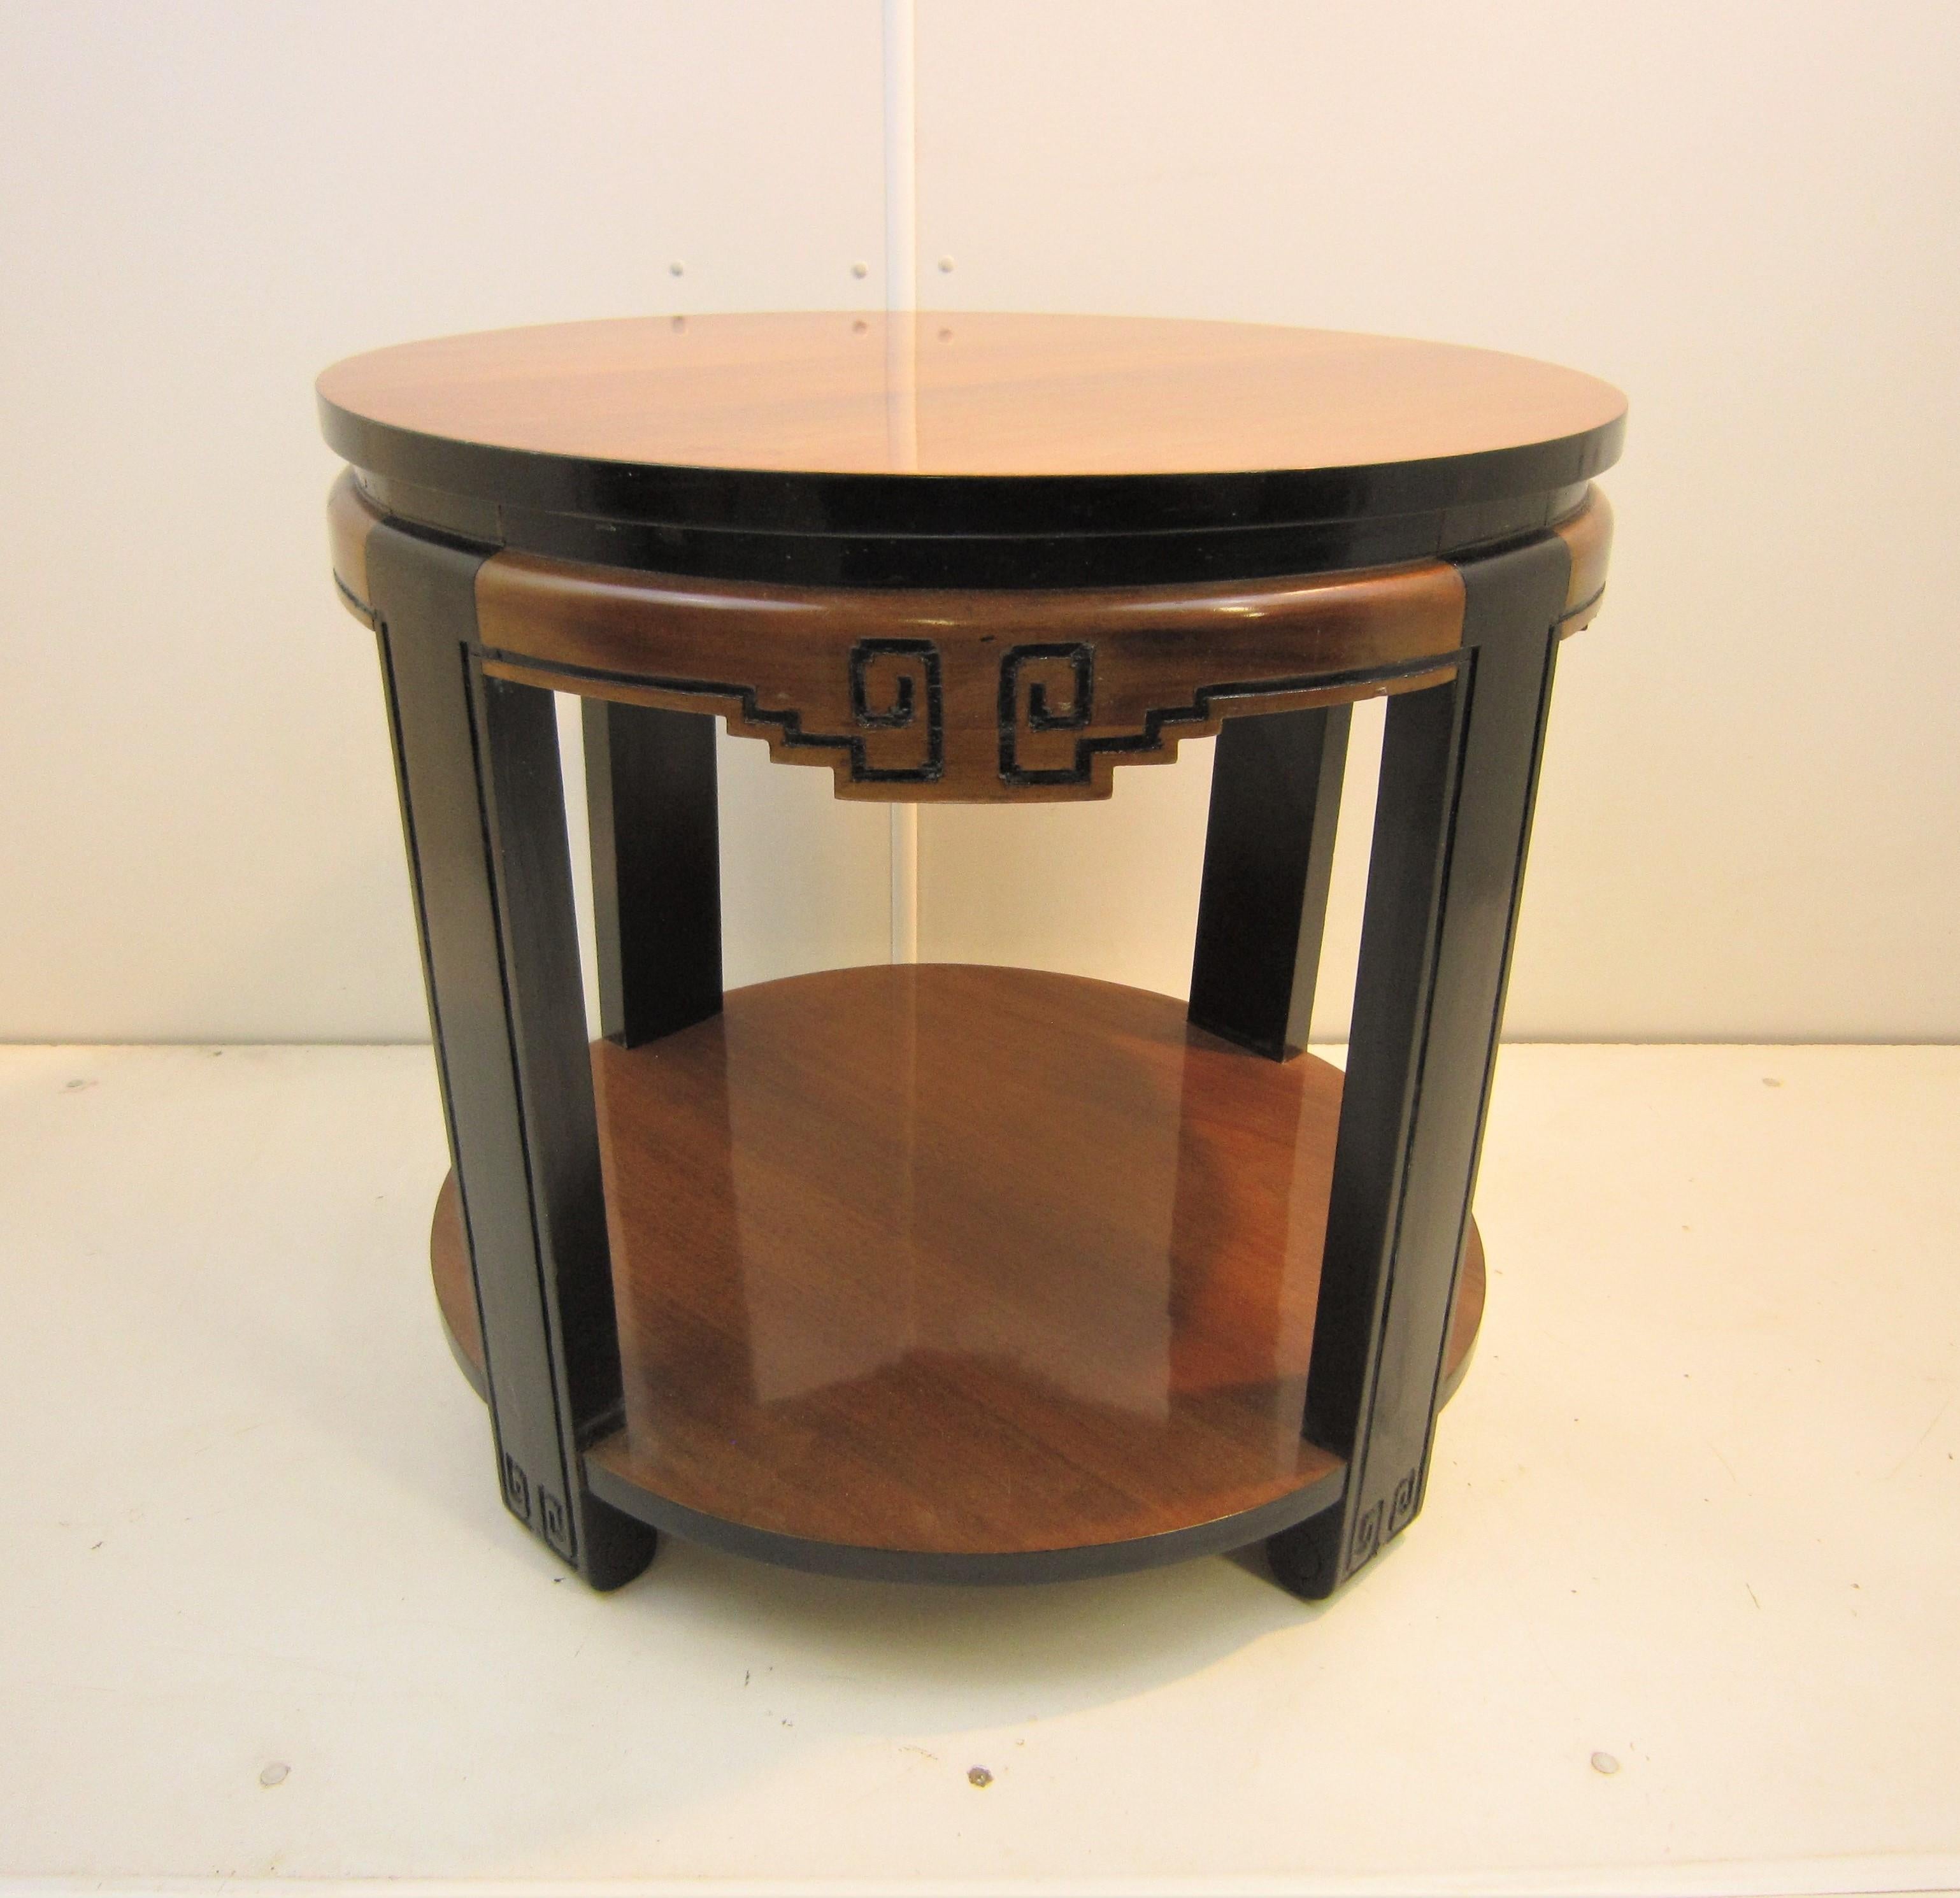 Original Art Deco Two-Tone Circular Table with Chinoiserie Design For Sale 5